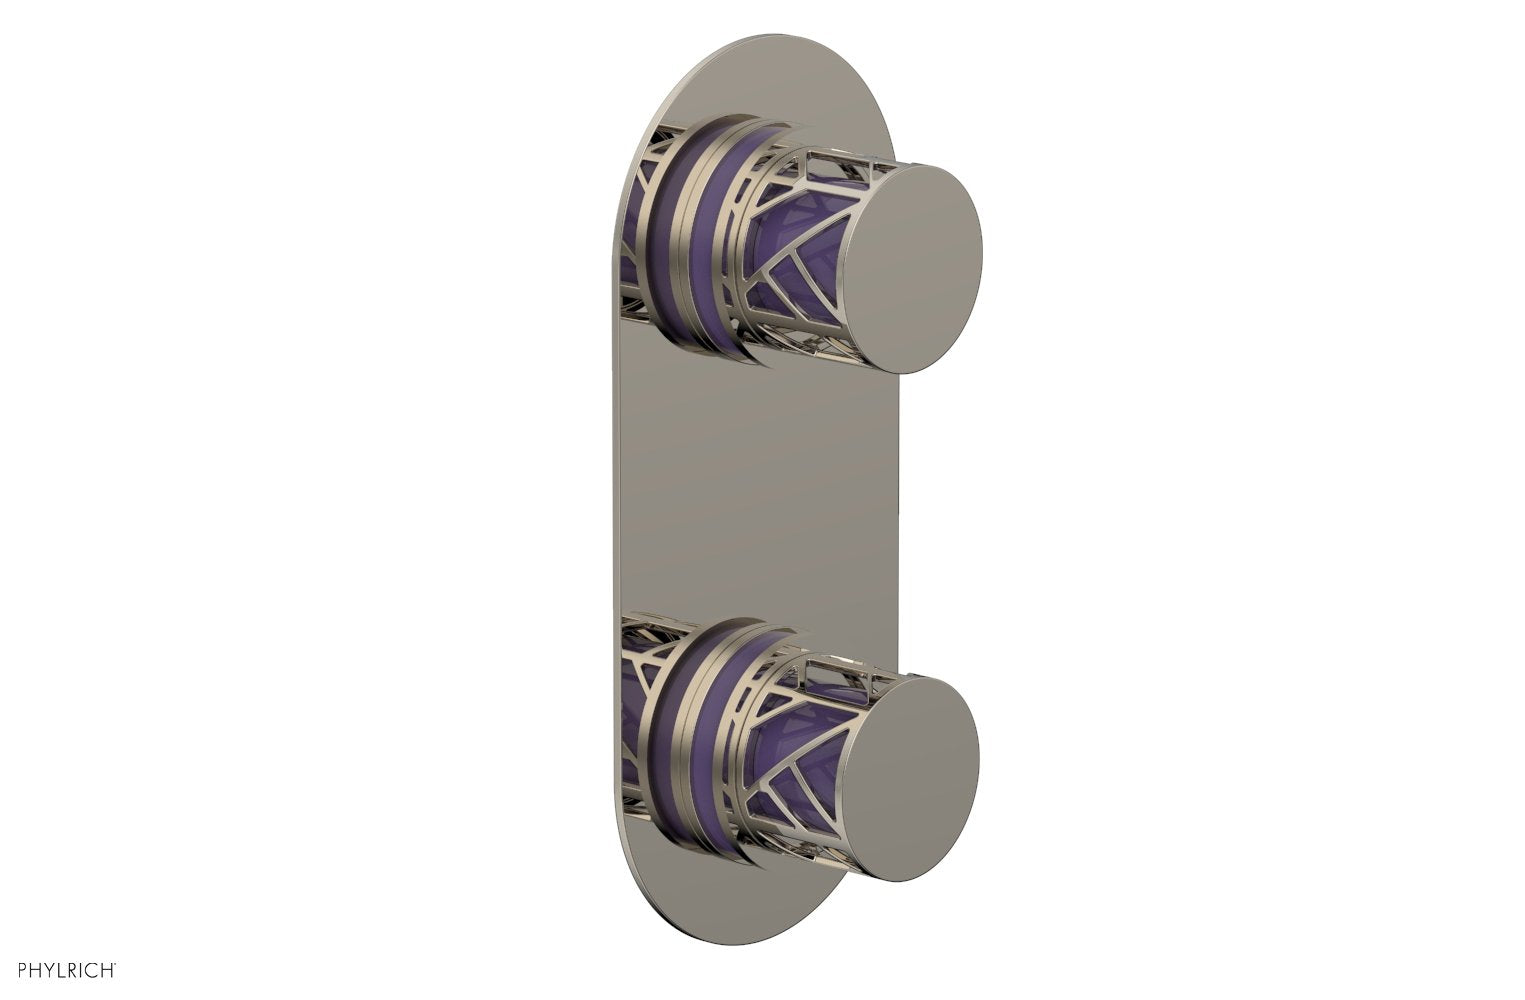 Phylrich JOLIE Thermostatic Valve with Volume Control or Diverter with "Purple" Accents